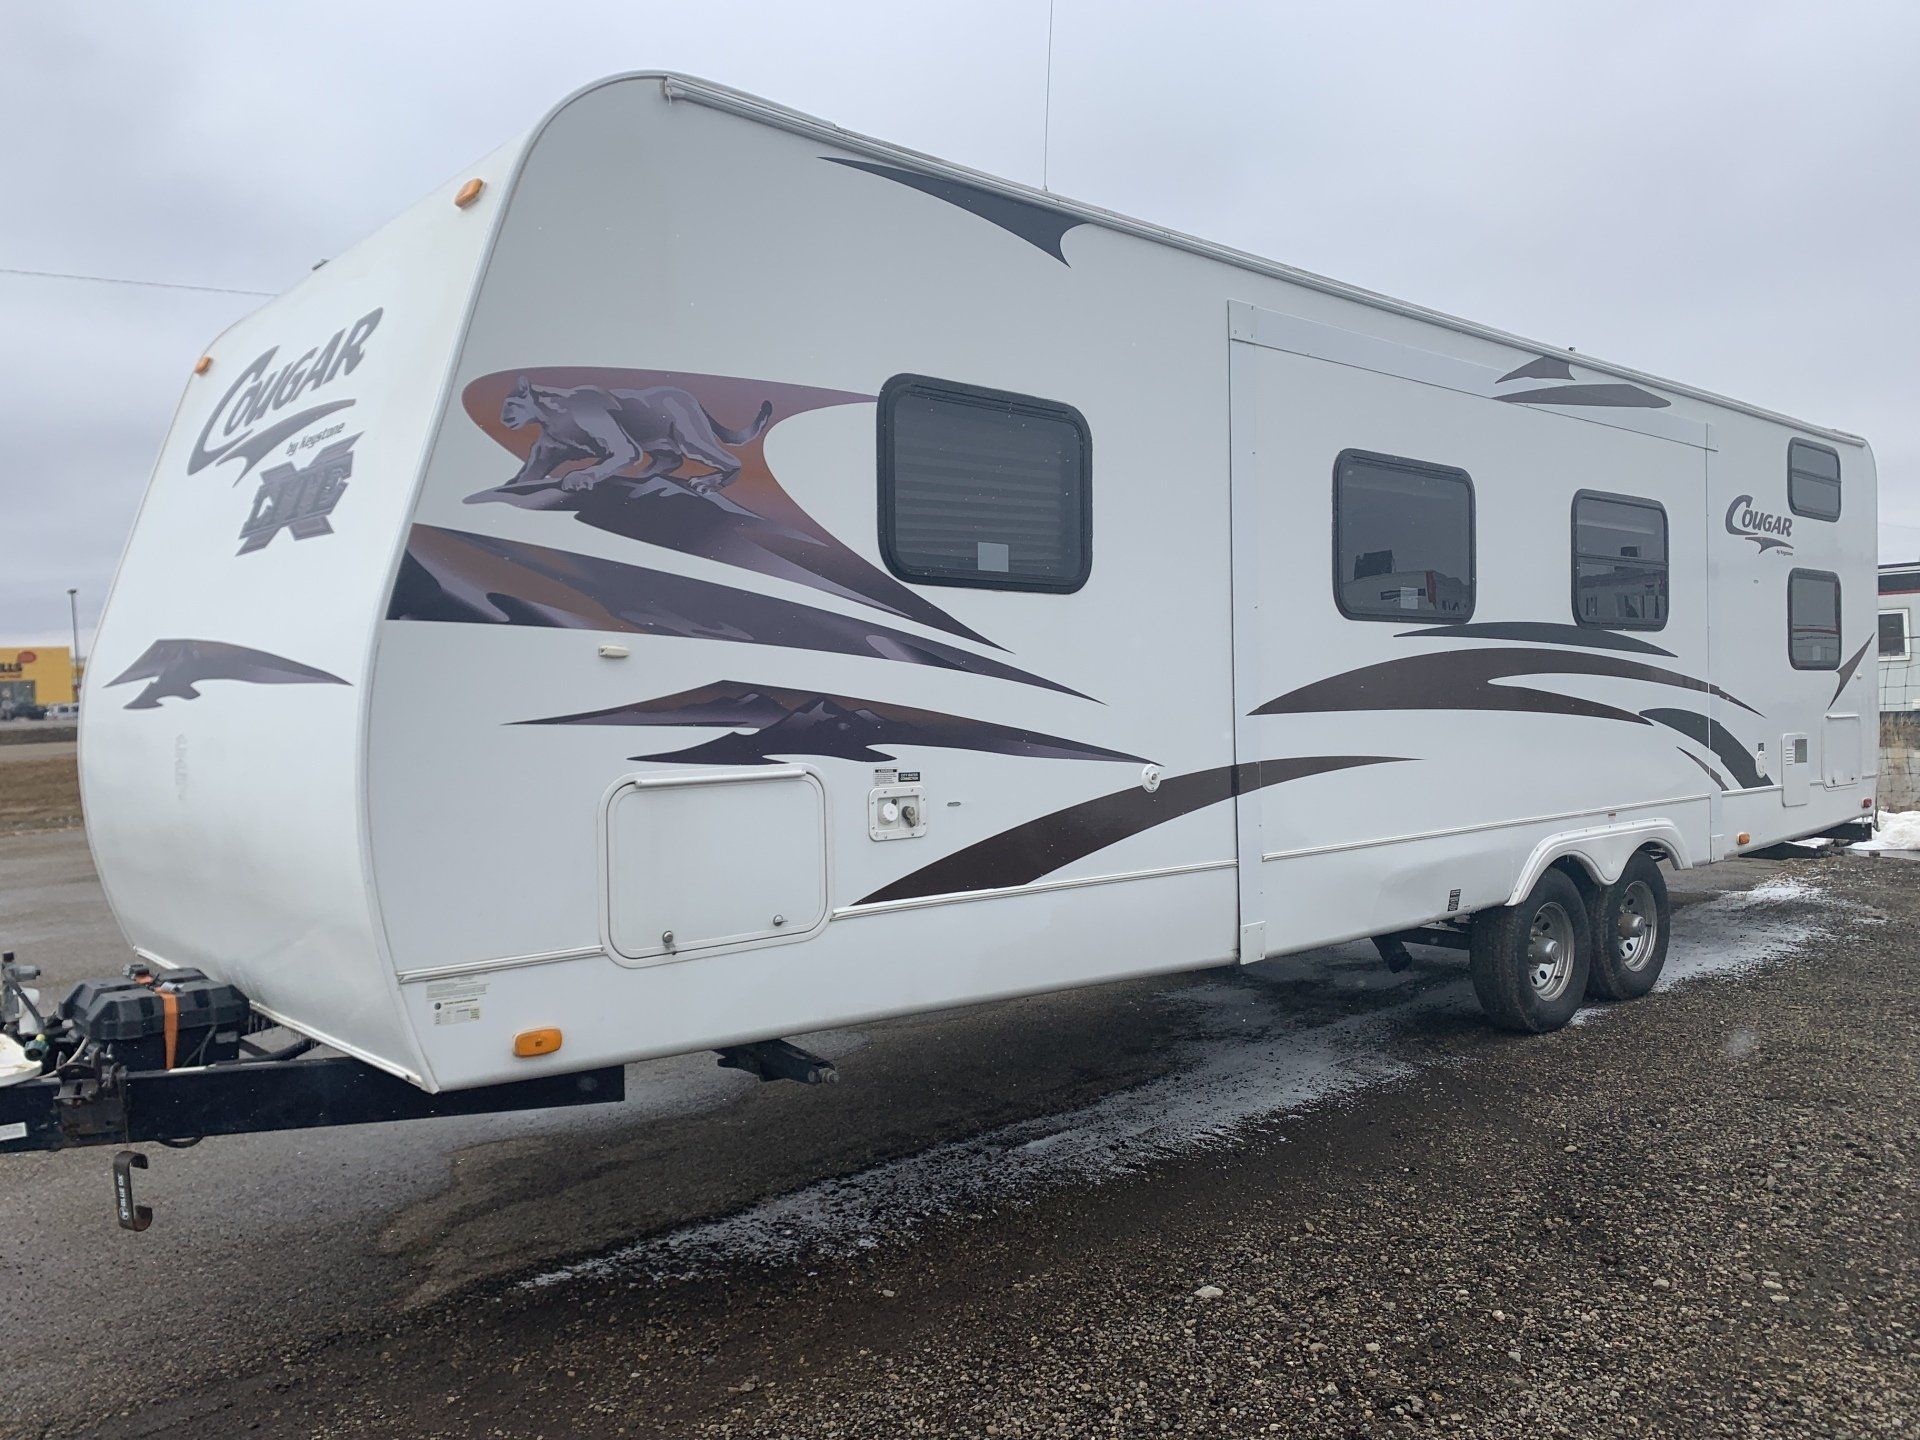 2020 - Alberta's Worst RV Decal Contest - Grand Prize Winner - Before & After - Pic 3